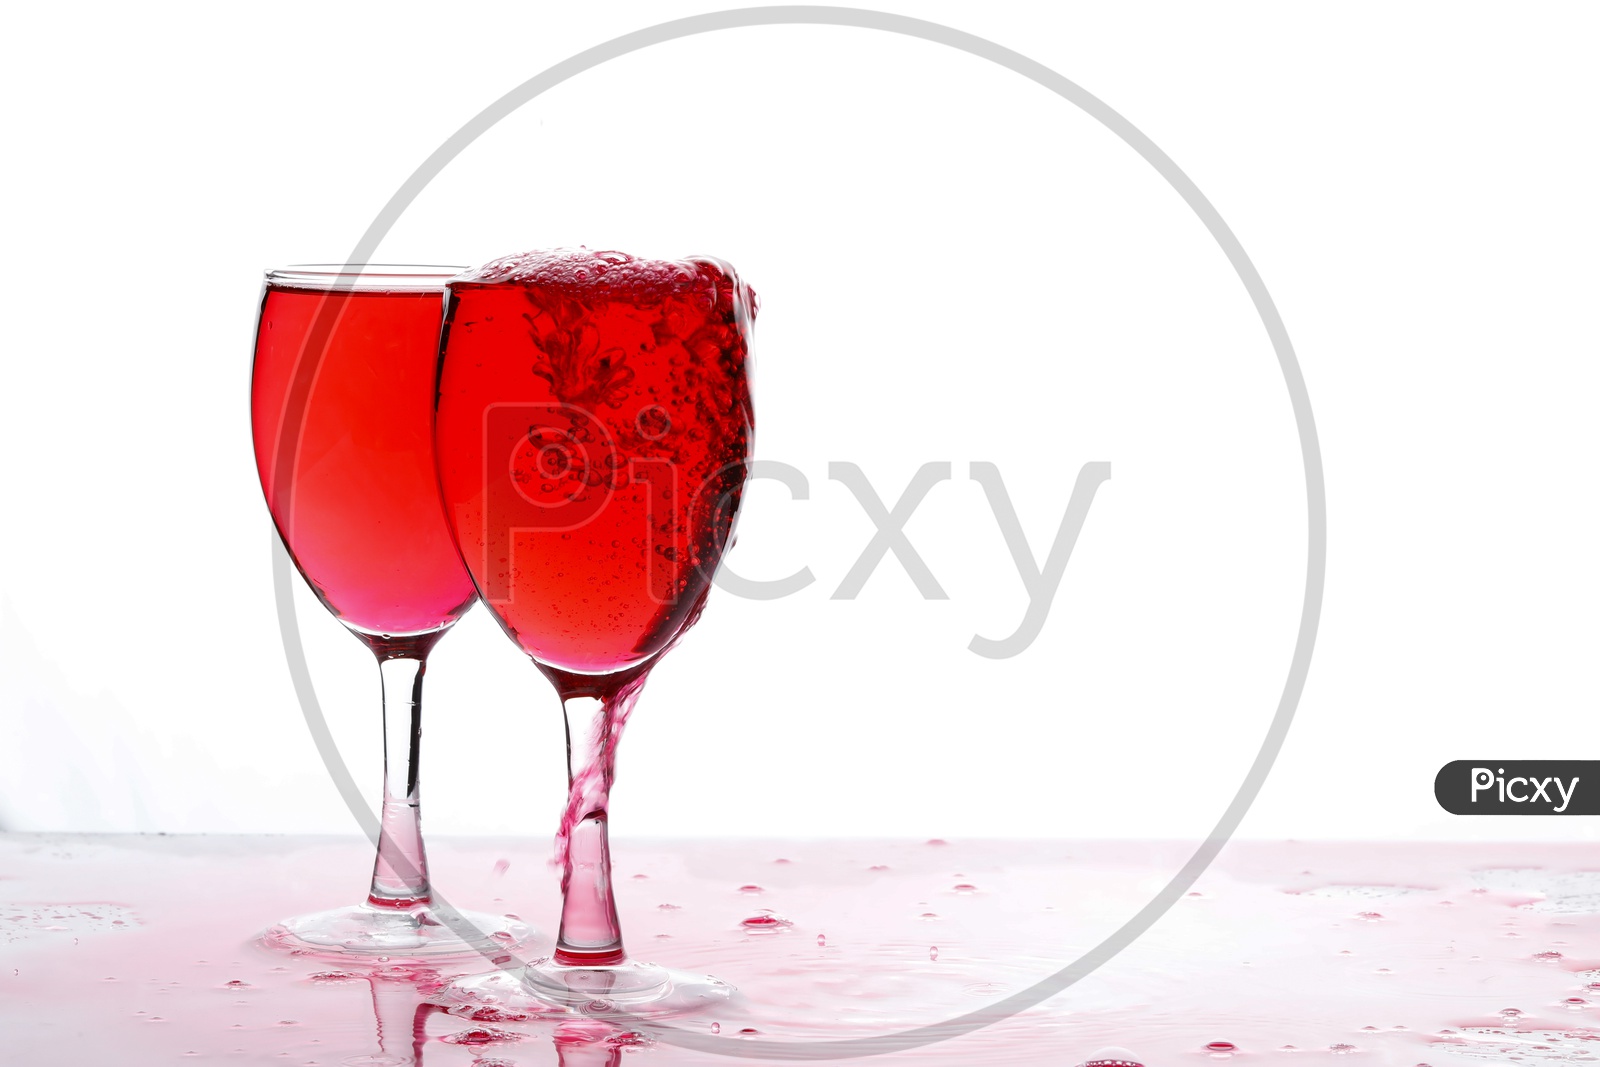 Red Wine In Wine Glasses On an Isolated White Background